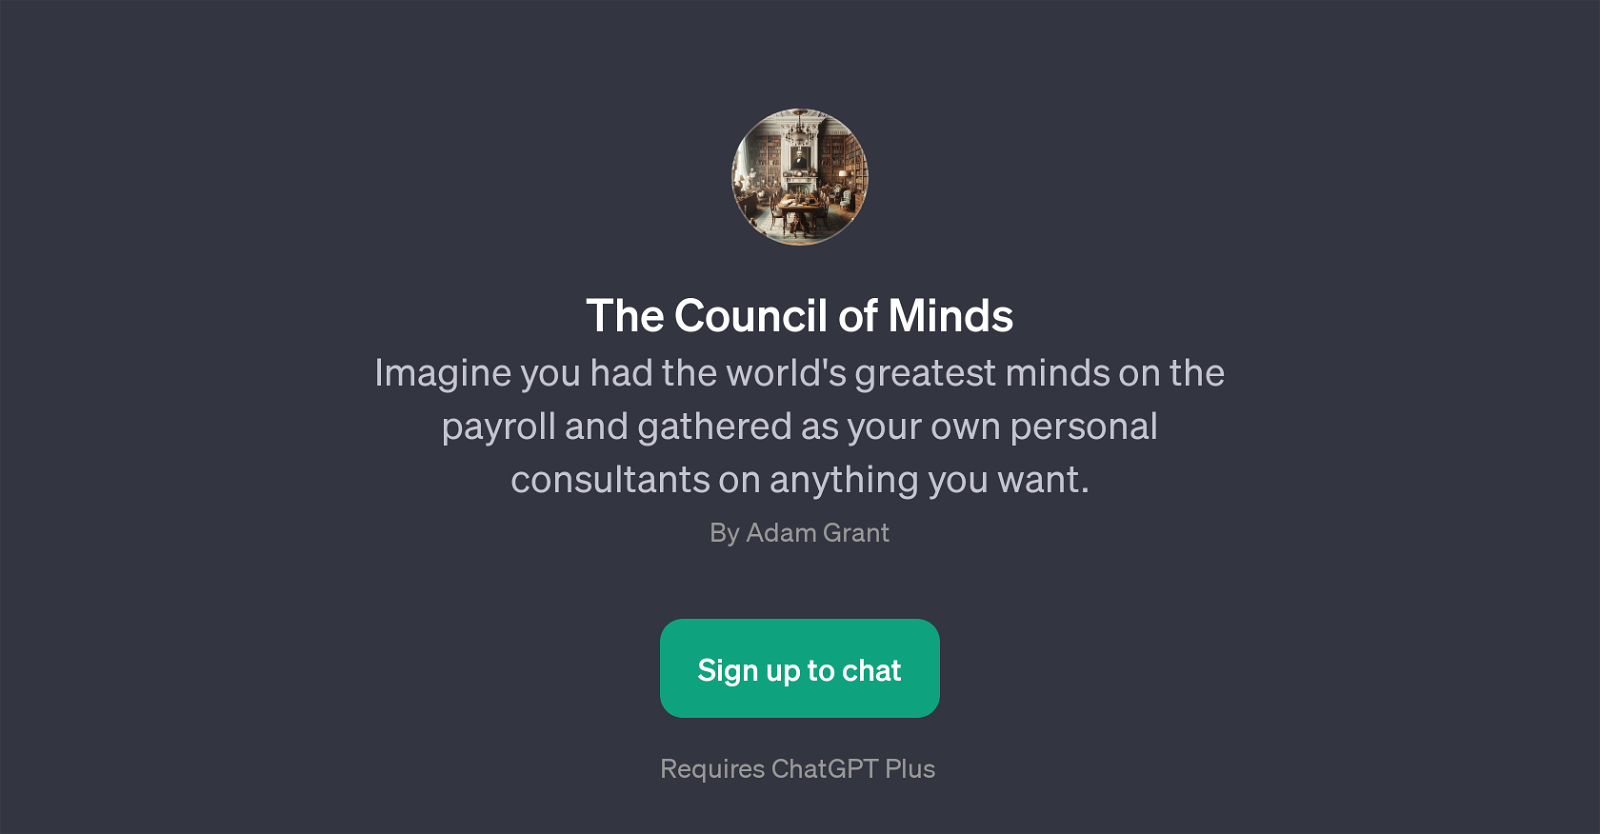 The Council of Minds website